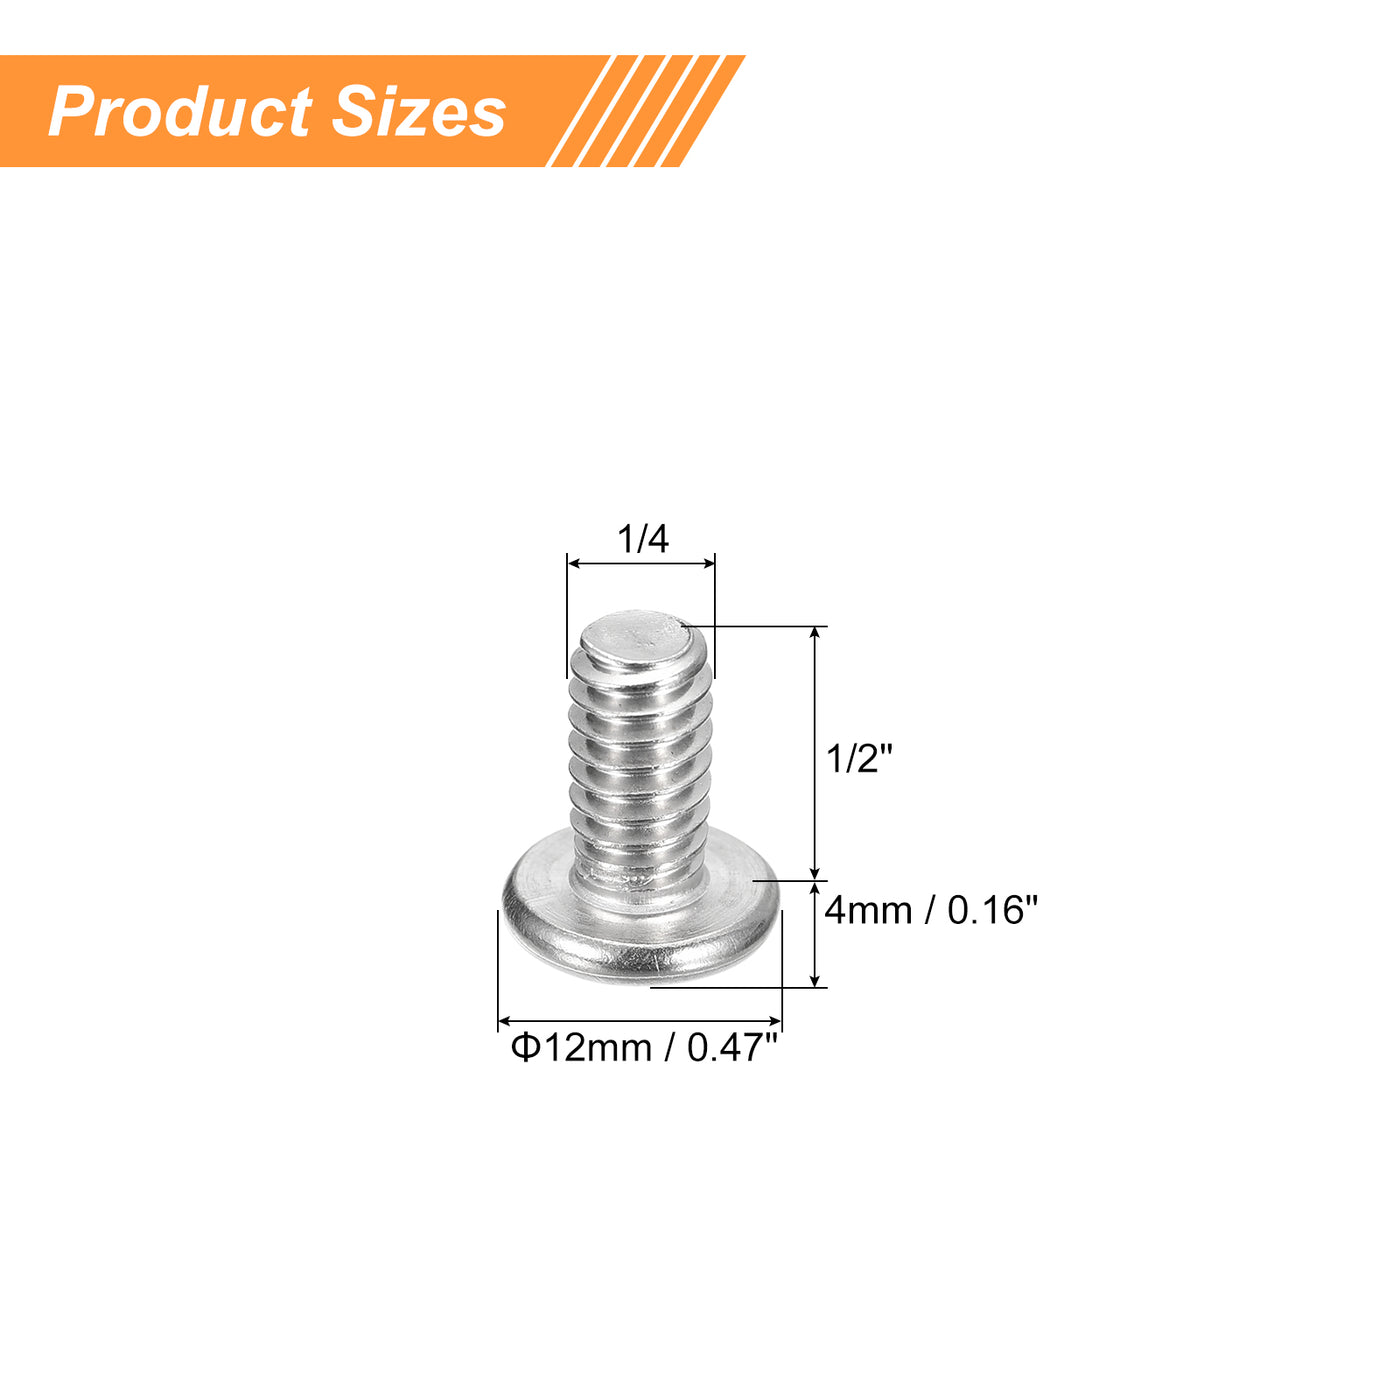 uxcell Uxcell 1/4-20x1/2" Pan Head Machine Screws, Stainless Steel 18-8 Screw, Pack of 20